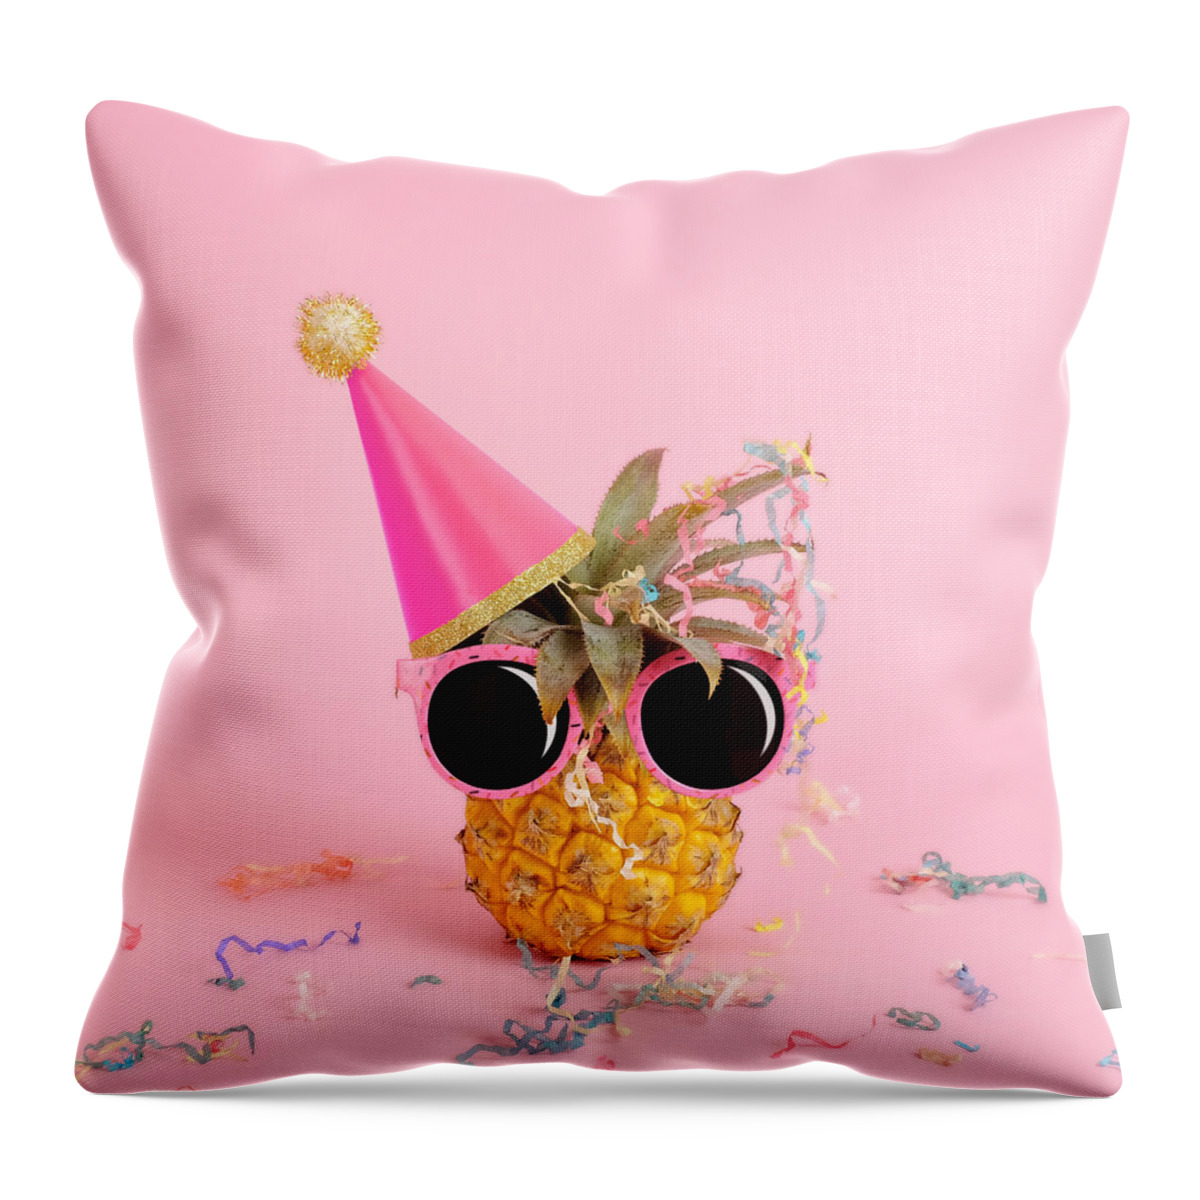 Celebration Throw Pillow featuring the photograph Pineapple Wearing A Party Hat And by Juj Winn